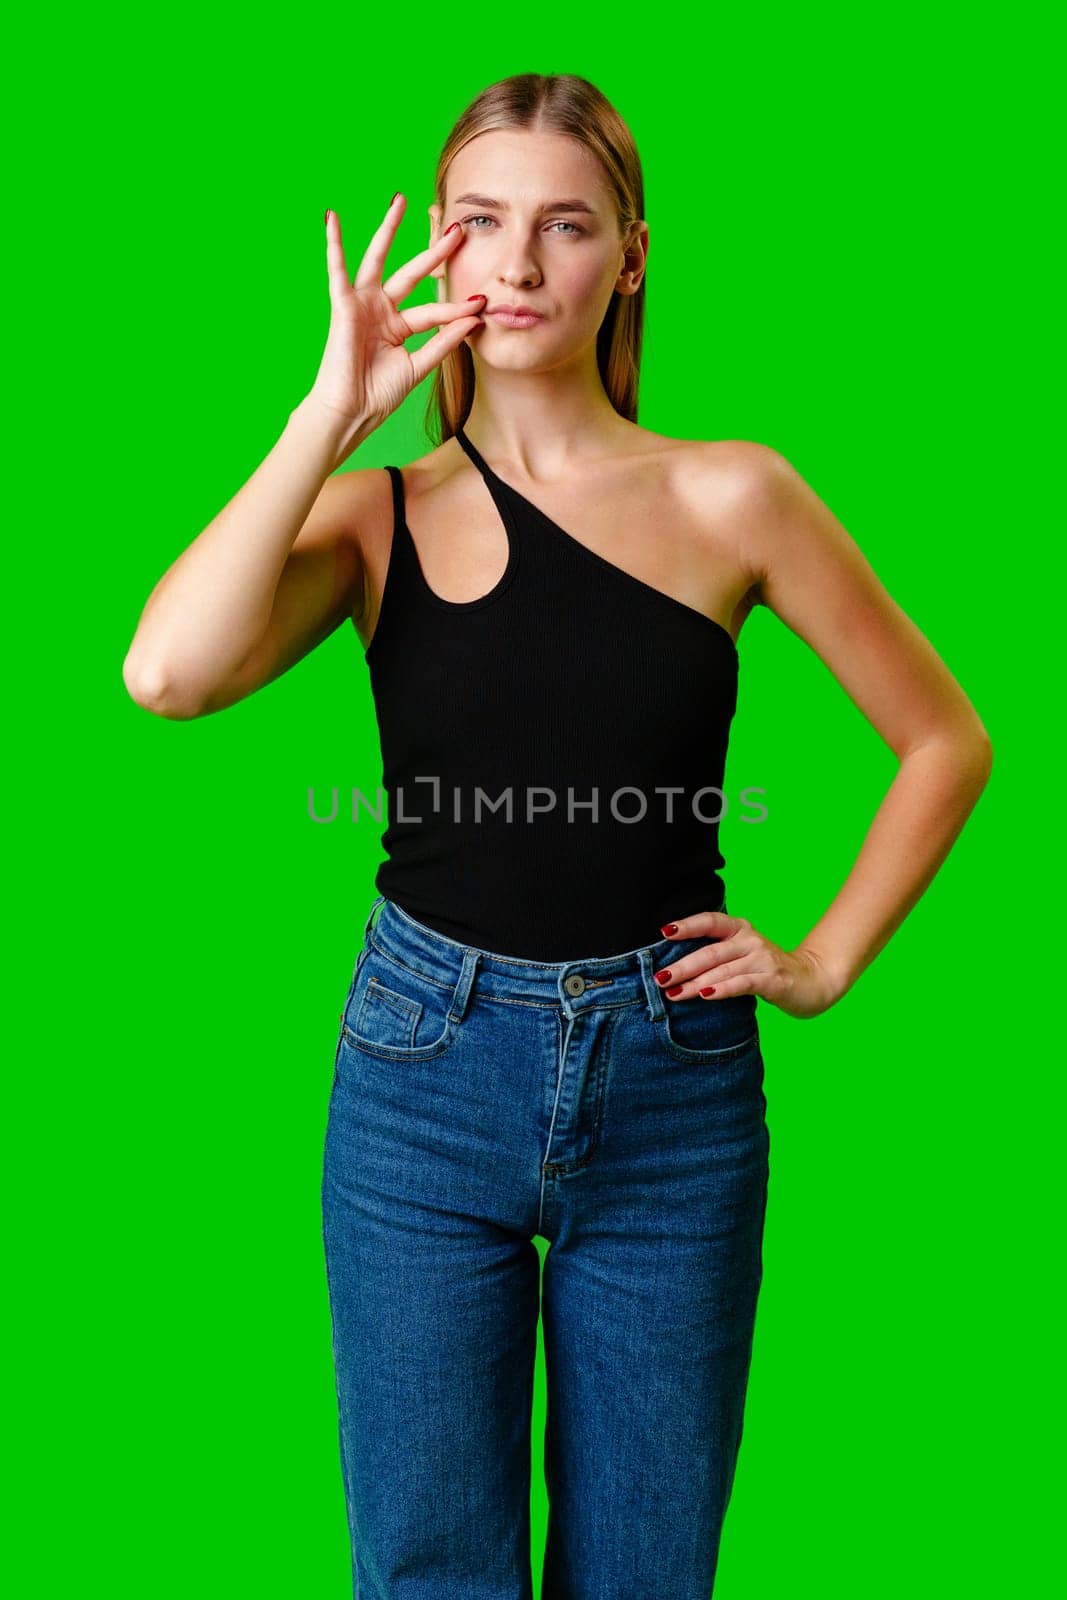 Young Woman Gesturing Silence With Finger on Lips Against Green Screen Background in studio